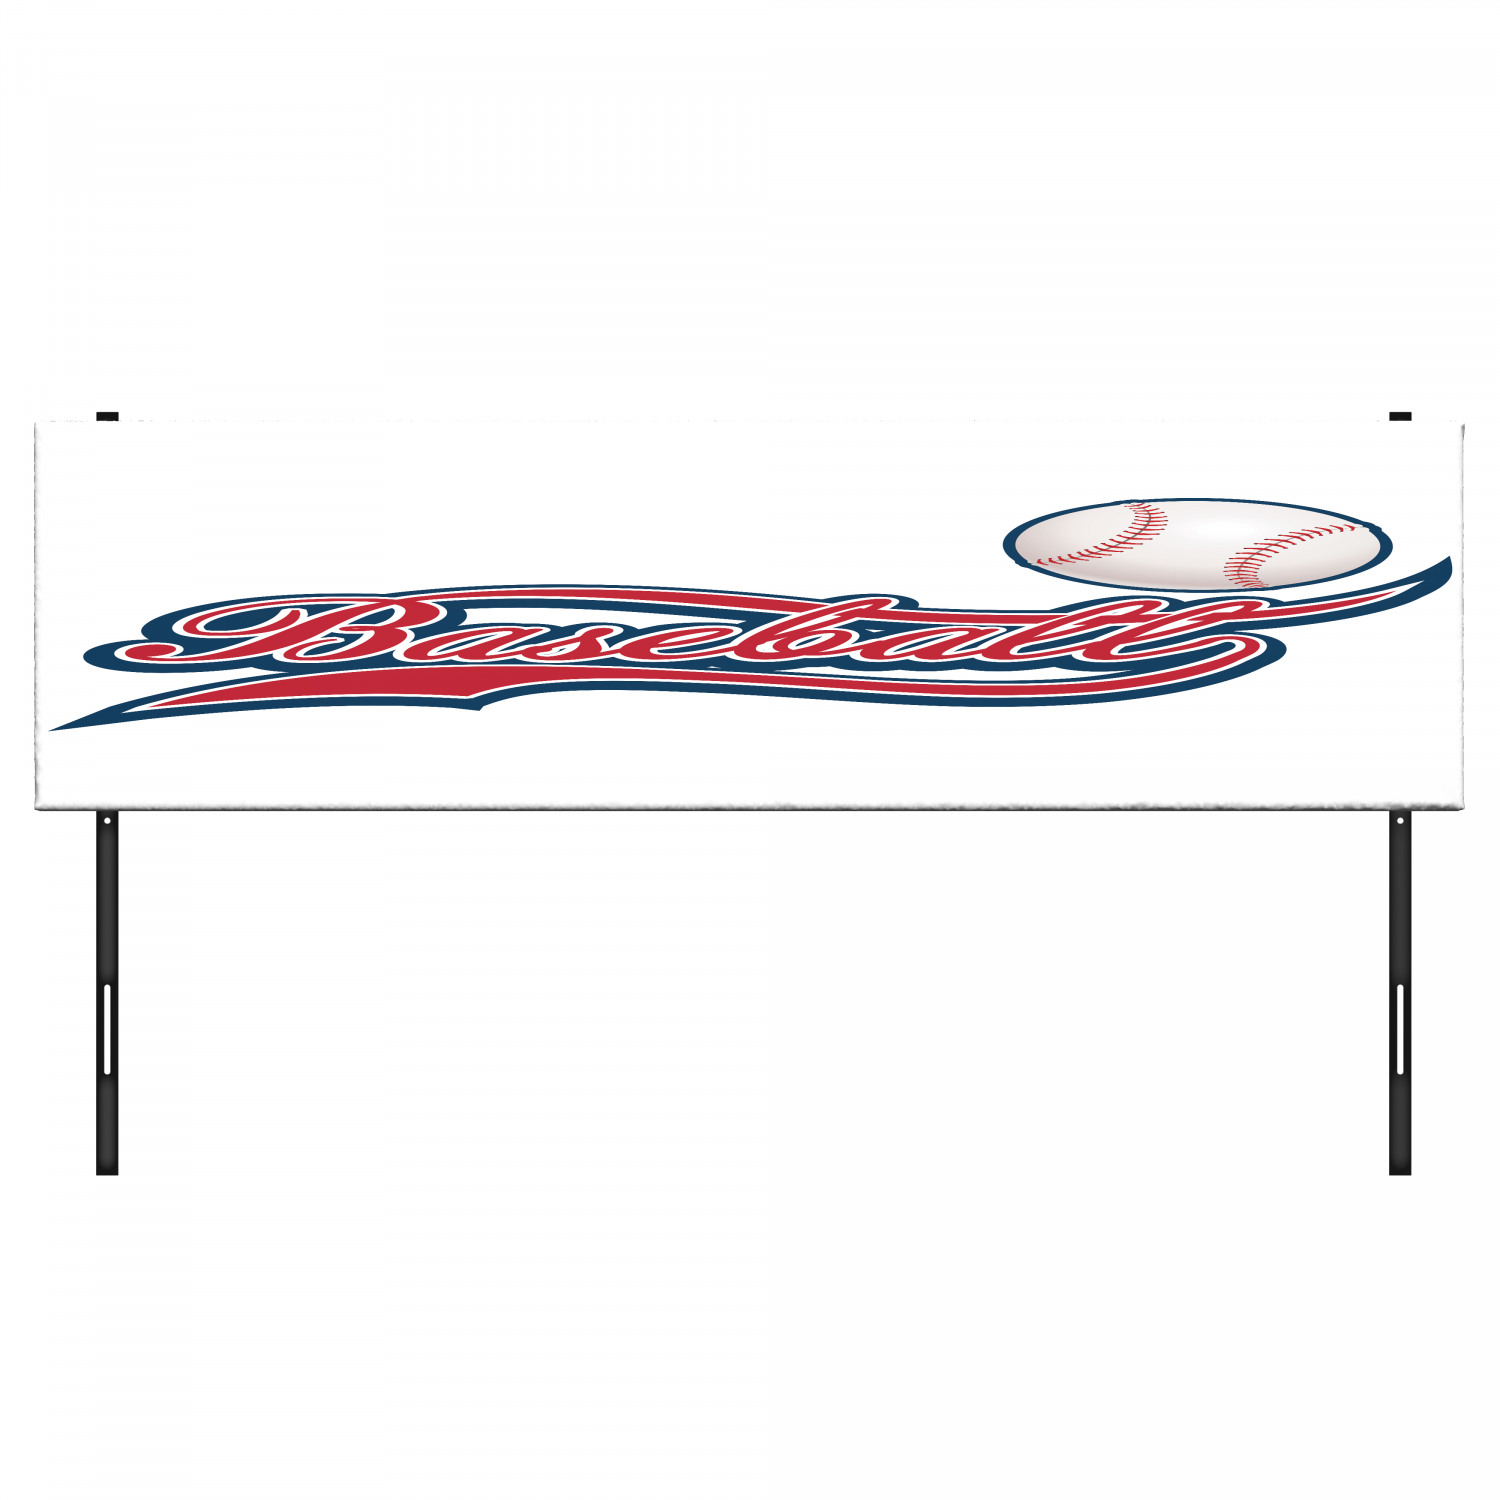 Sports Headboard, Baseball Ball Sporting Pastime National Sport Athleticism Entertainment, Upholstered Decorative Metal Bed Headboard with Memory Foam, King Size, Night Blue Red White, by Ambesonne - image 3 of 4